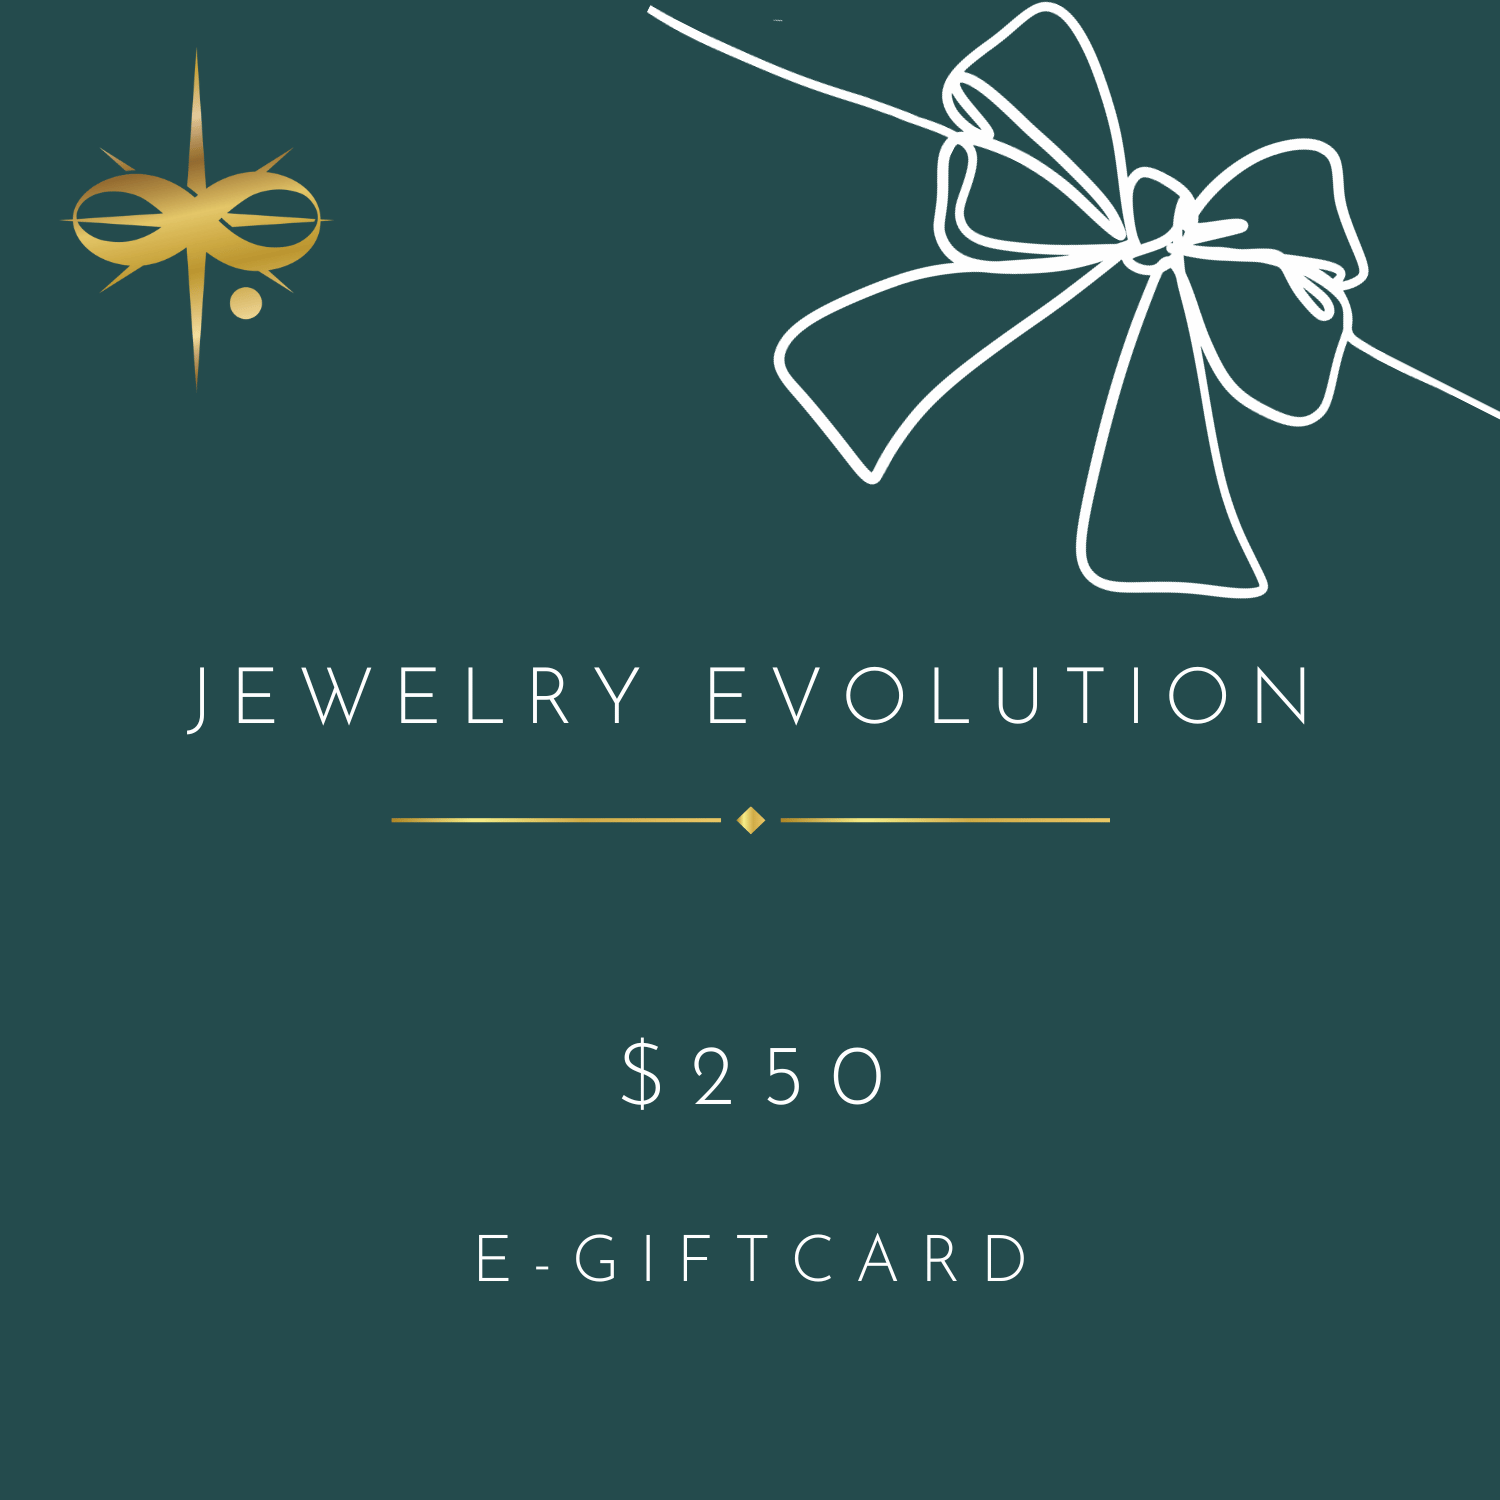 Jewelry Evolution Gift Card $250.00 Gift Card